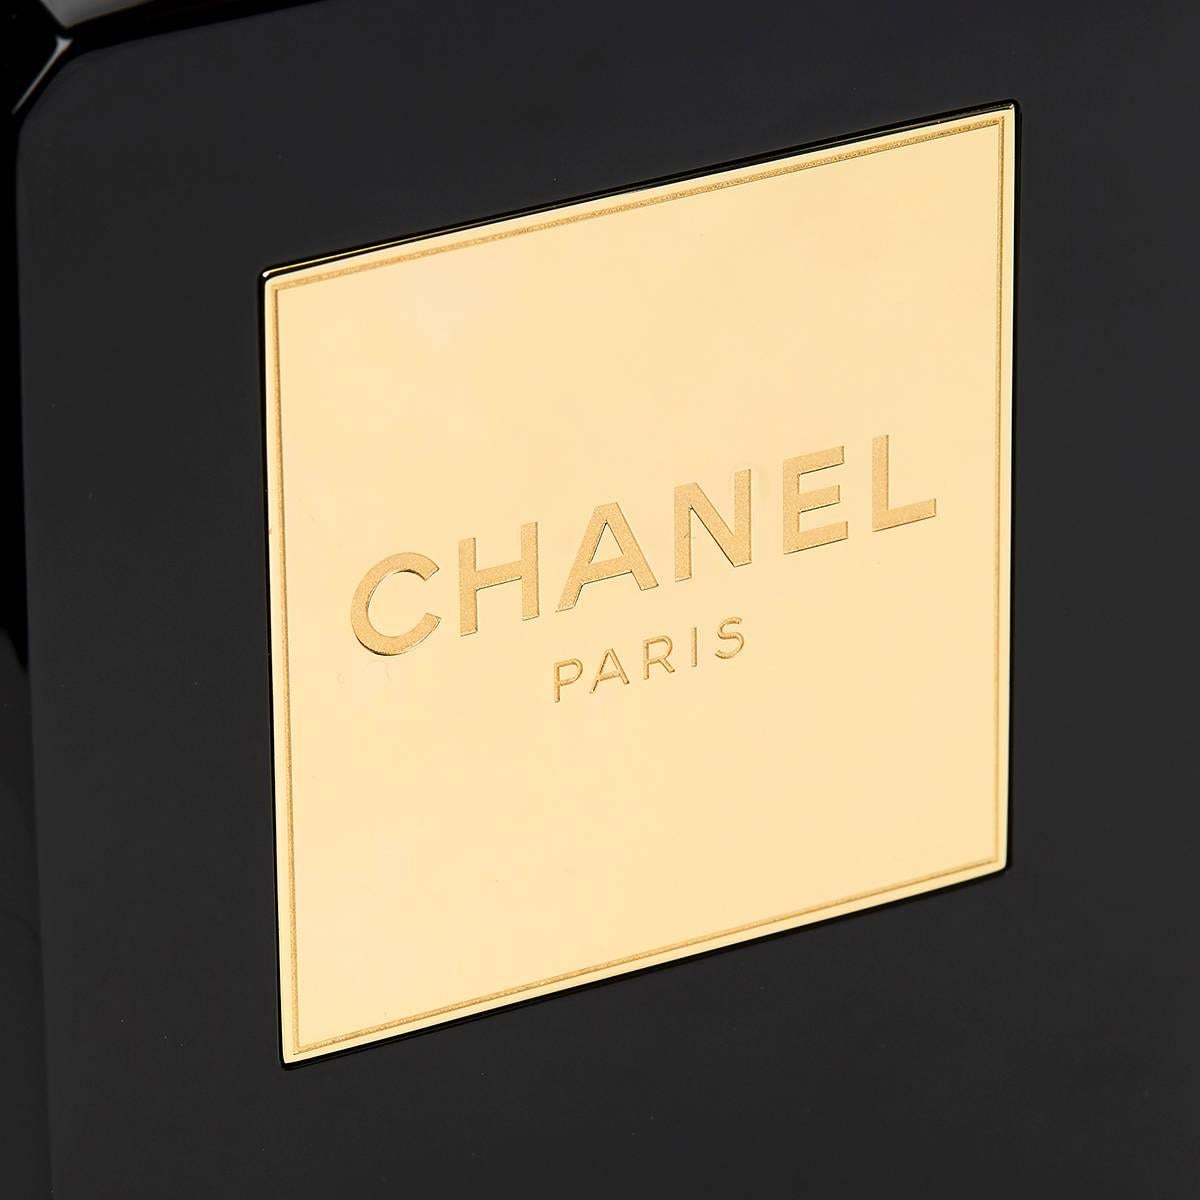 CHANEL
Black Plexiglass No. 5 Perfume Bottle Bag 2014

This ladies Chanel Perfume Bottle Bag is primarily made from black plexiglass complemented by gold hardware. This bag is in excellent pre-owned condition accompanied by Chanel dust bag, box,